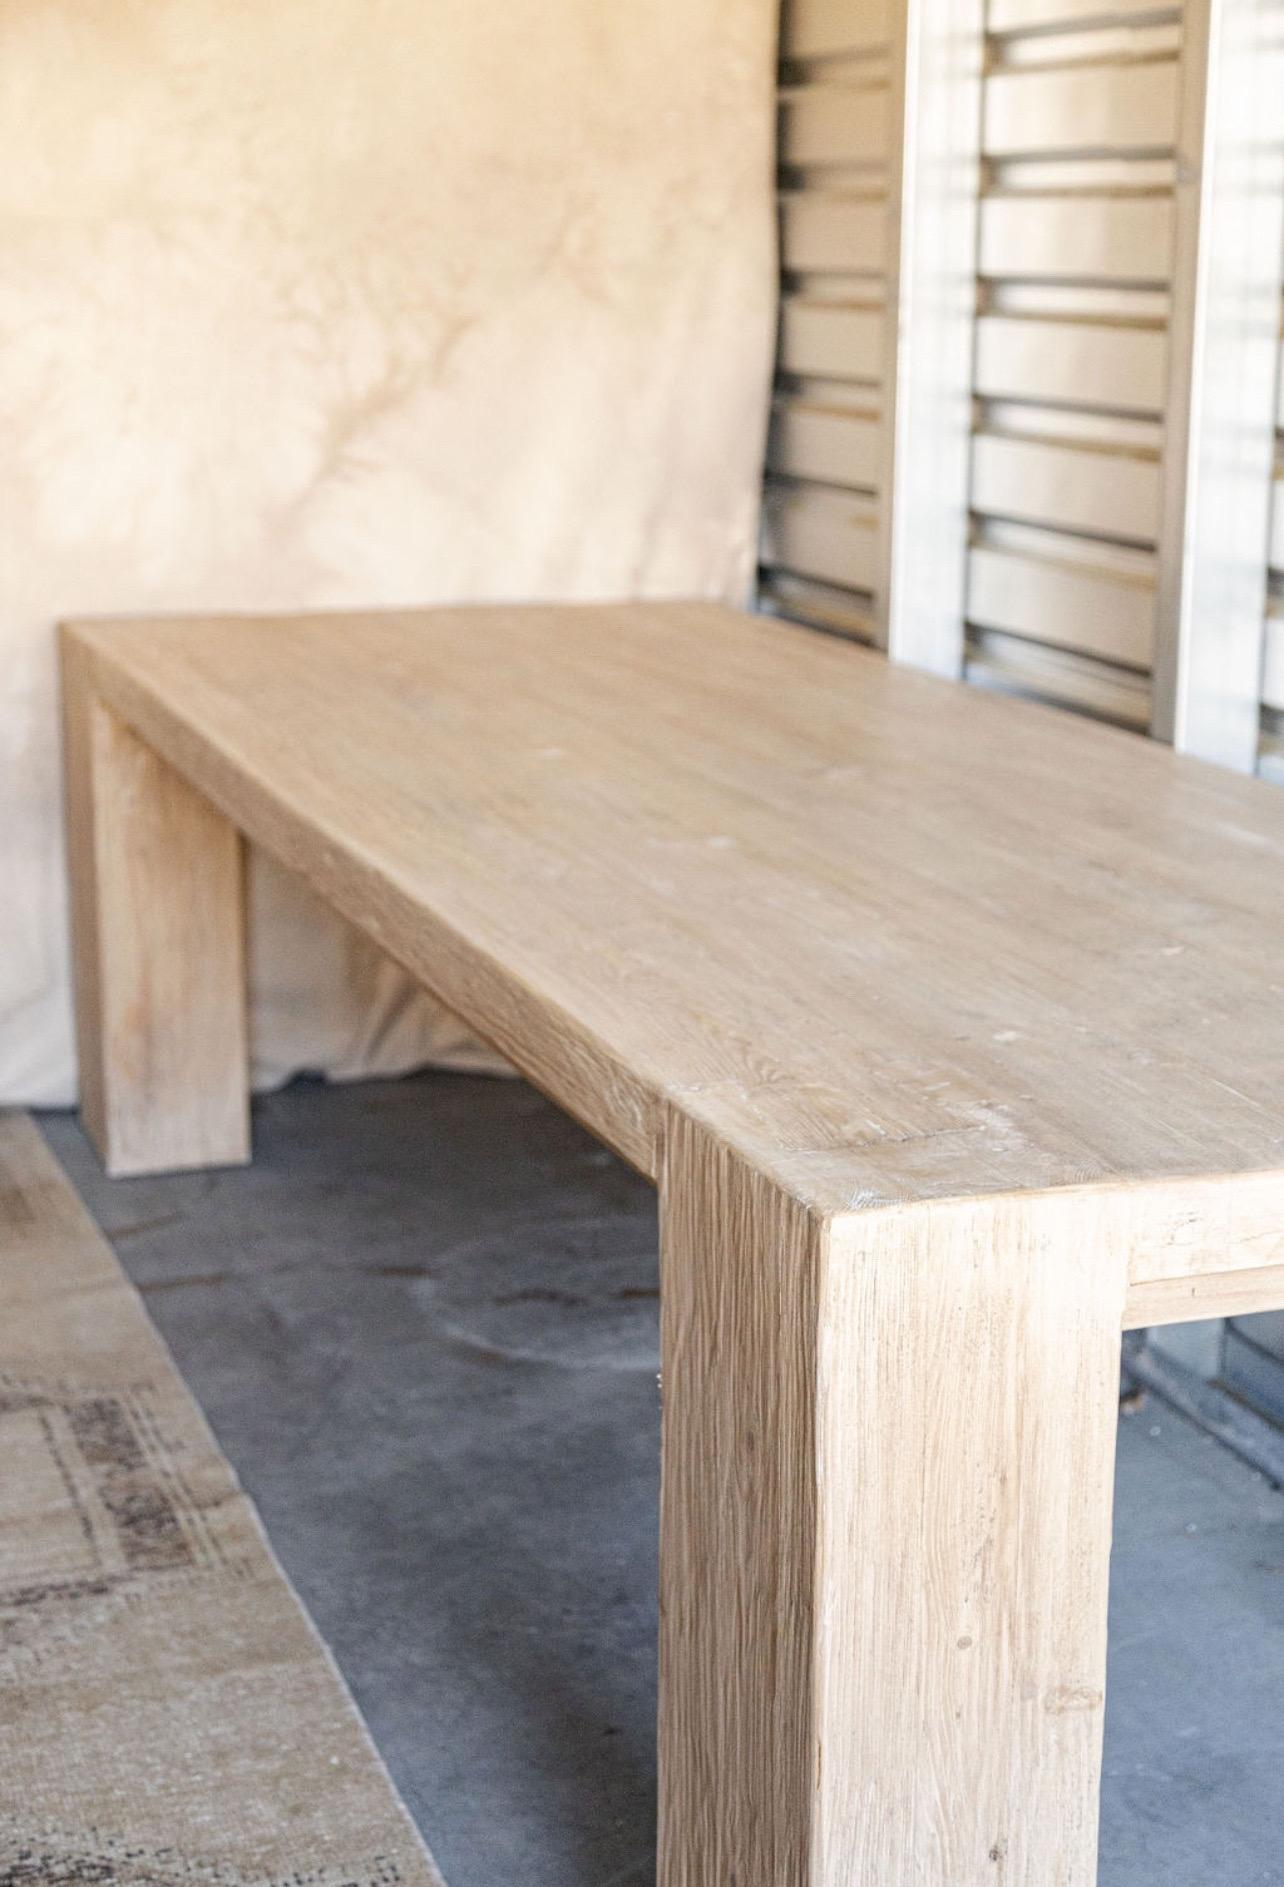 Our Bozeman dining table is one of a kind. Rustic, sturdy and rich in texture and character. Crafted from sourced oak and elm wood throughout Europe and Asia. 